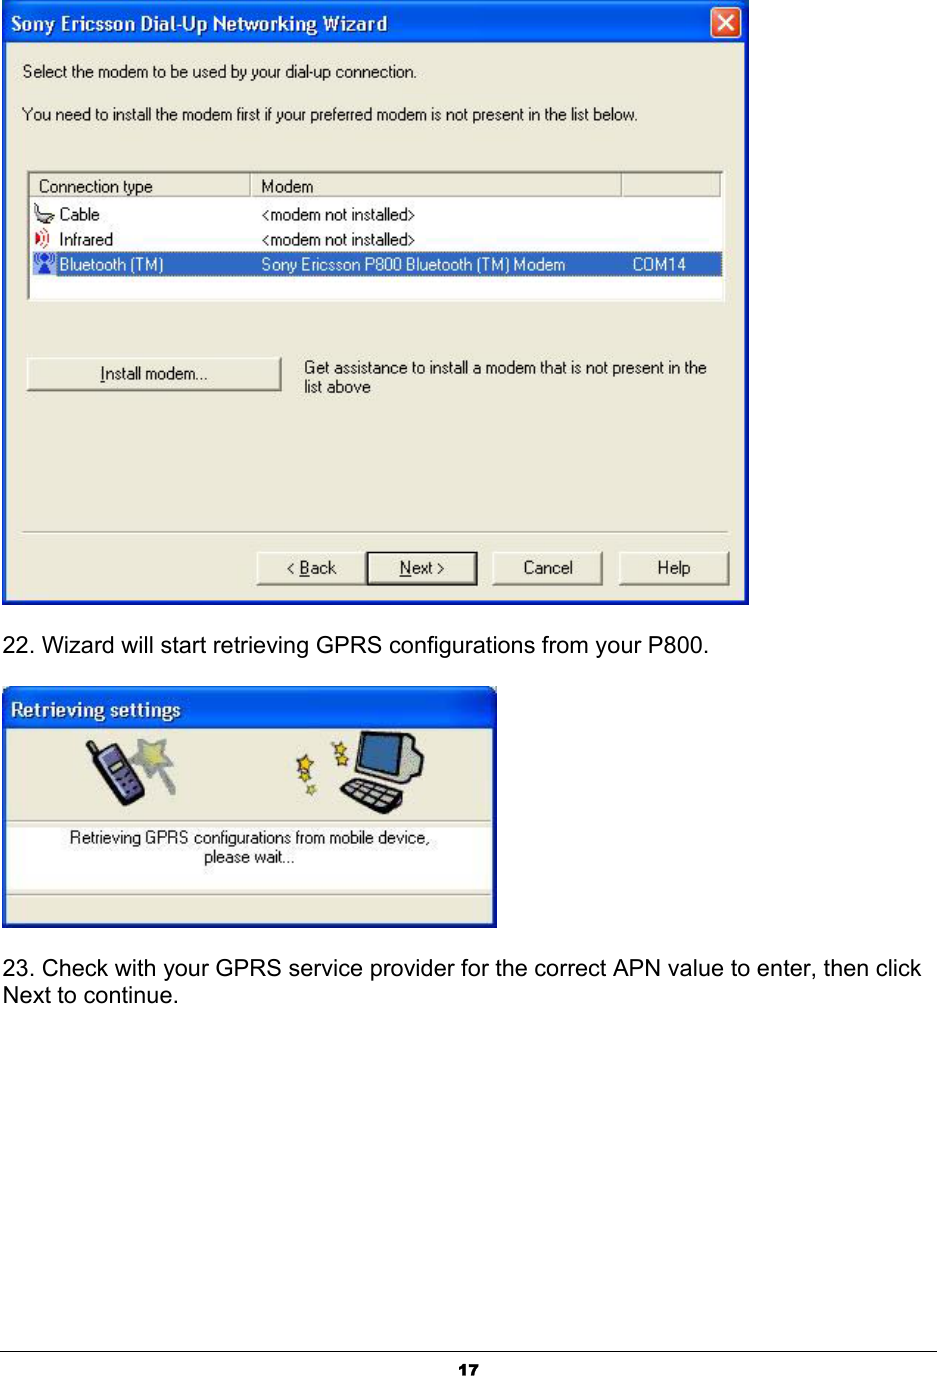  17 22. Wizard will start retrieving GPRS configurations from your P800.  23. Check with your GPRS service provider for the correct APN value to enter, then click Next to continue. 